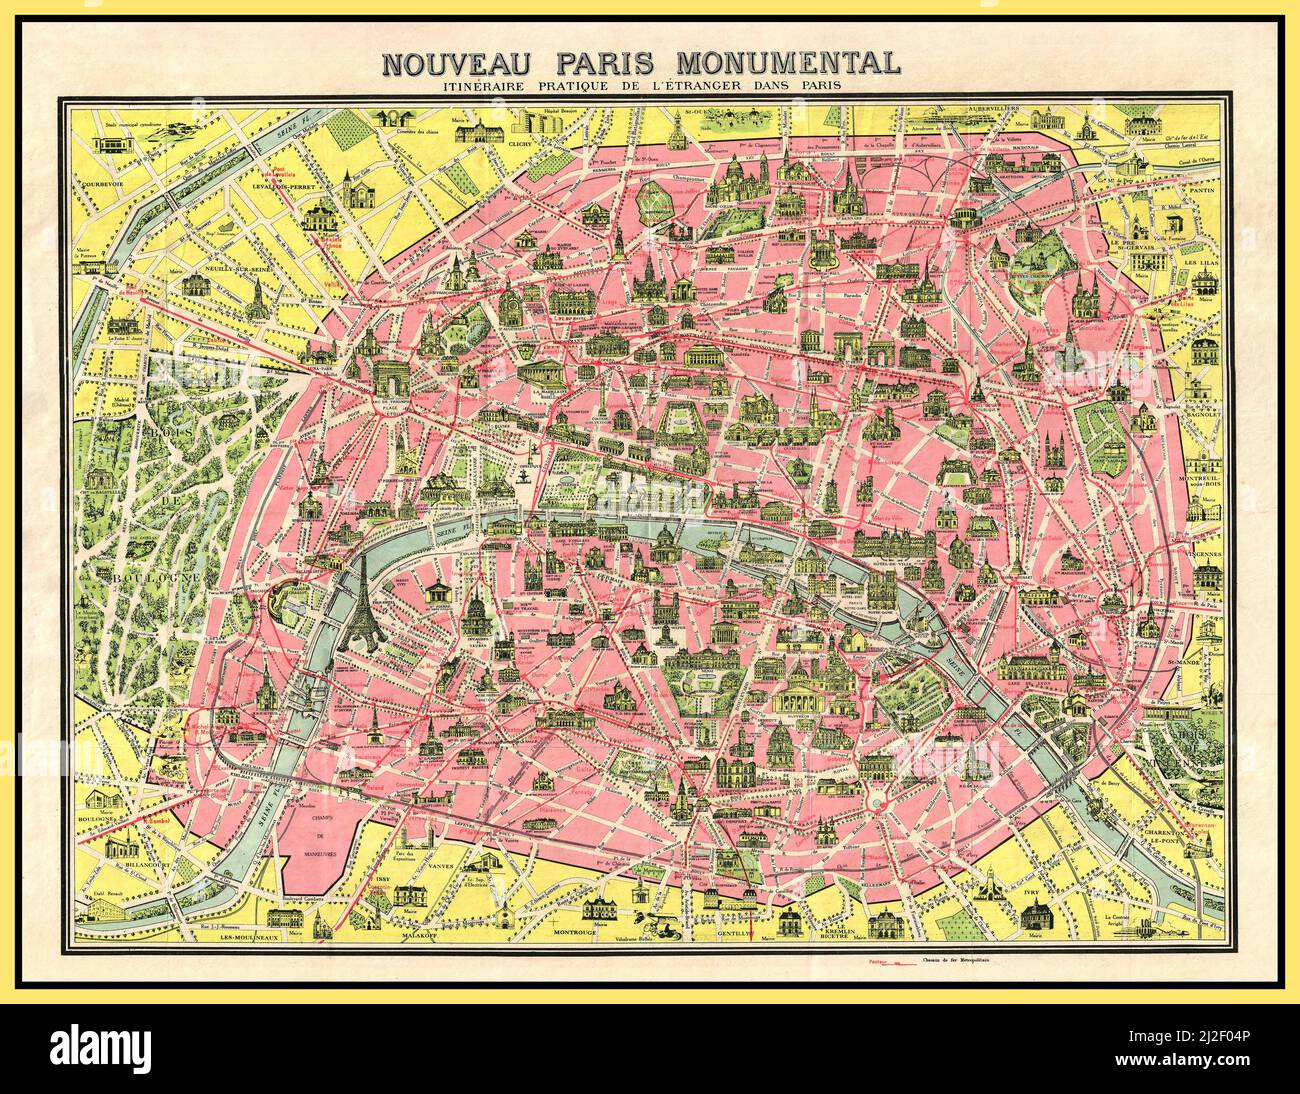 PARIS VINTAGE 1900s MONUMENTAL TOURIST POCKET MAP 1920 example of the famous Nouveau Paris Monumental tourist pocket map of Paris. Covers Paris from the Bois de Boulogne to the Bois de Vincennes. Monuments and important buildings are shown in relief - including the Eiffel Tower. Also shows roadways and Metro lines.. The state of development of the Paris Metro, particularly the extension of the 11, suggests that this map must have been printed around 1920 - 1925. Paris City France Stock Photo